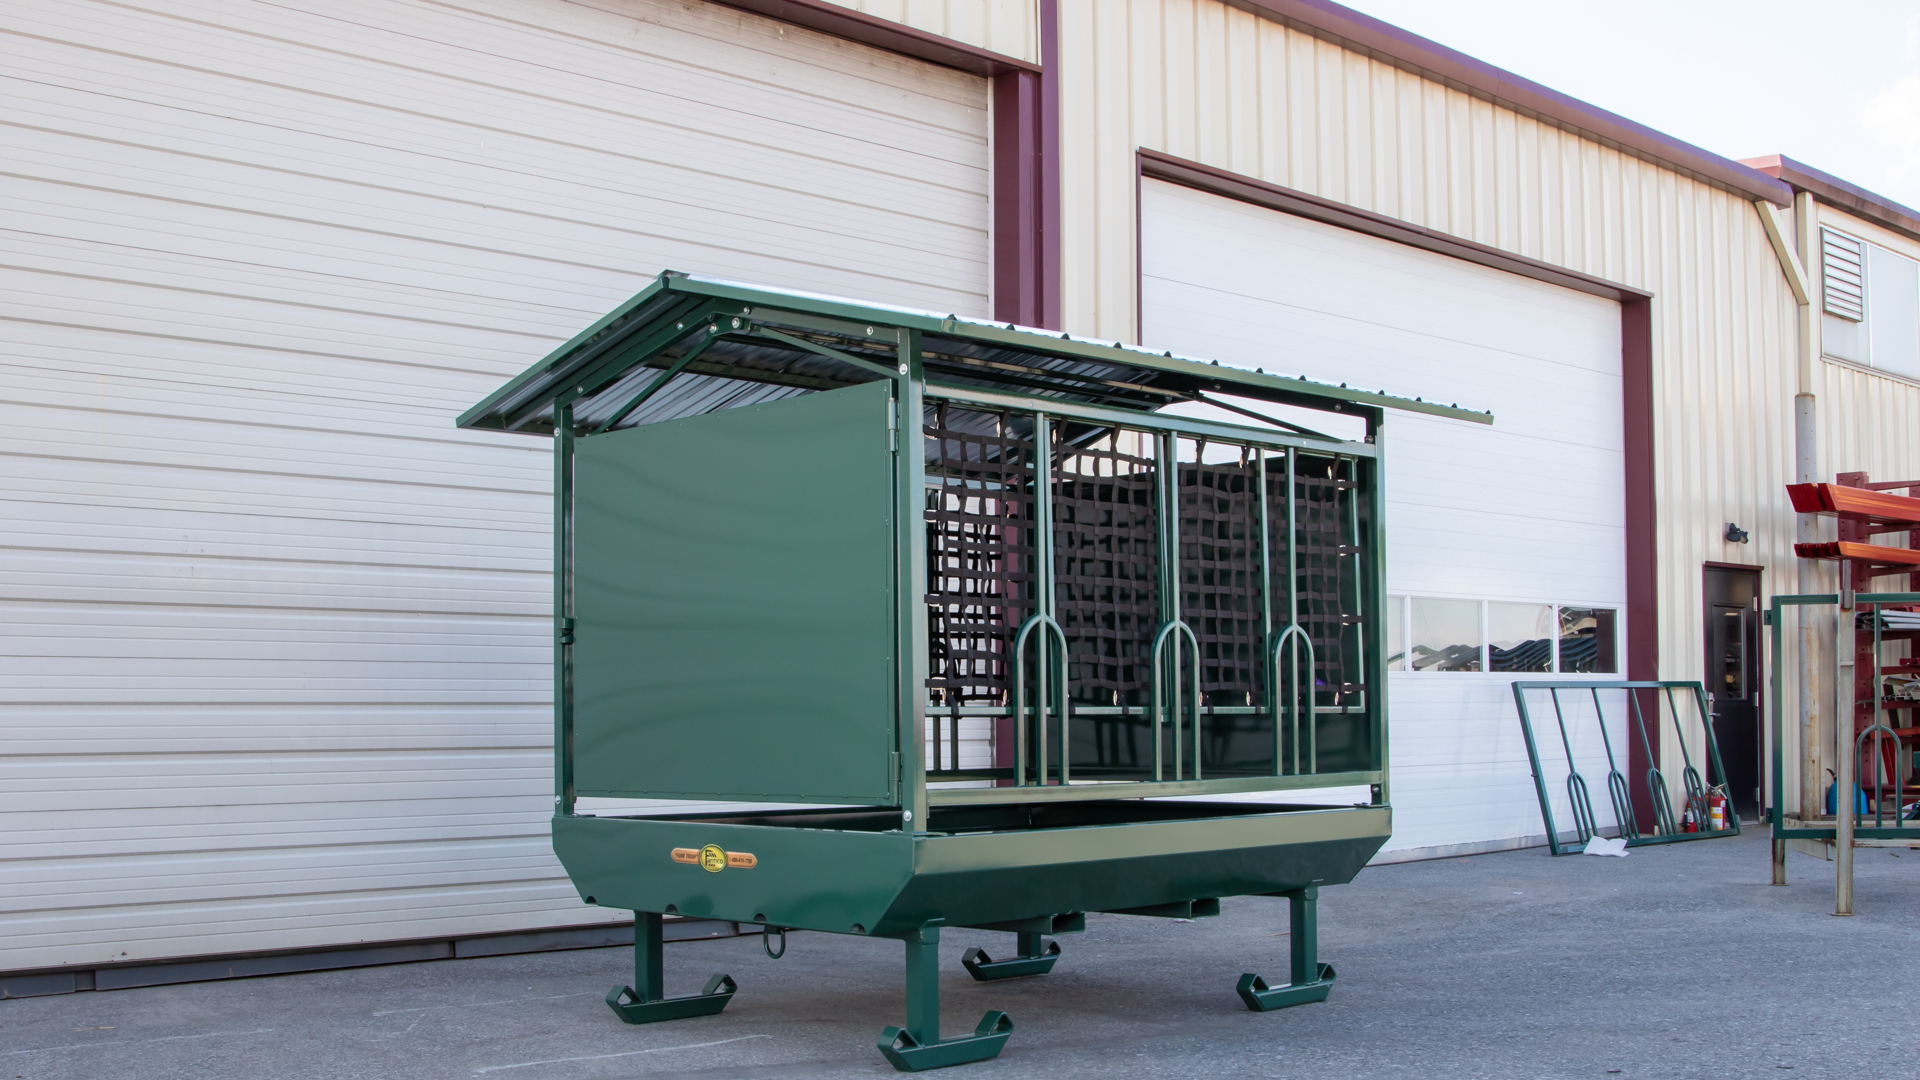 exterior of slow feeder that can be used for show horses